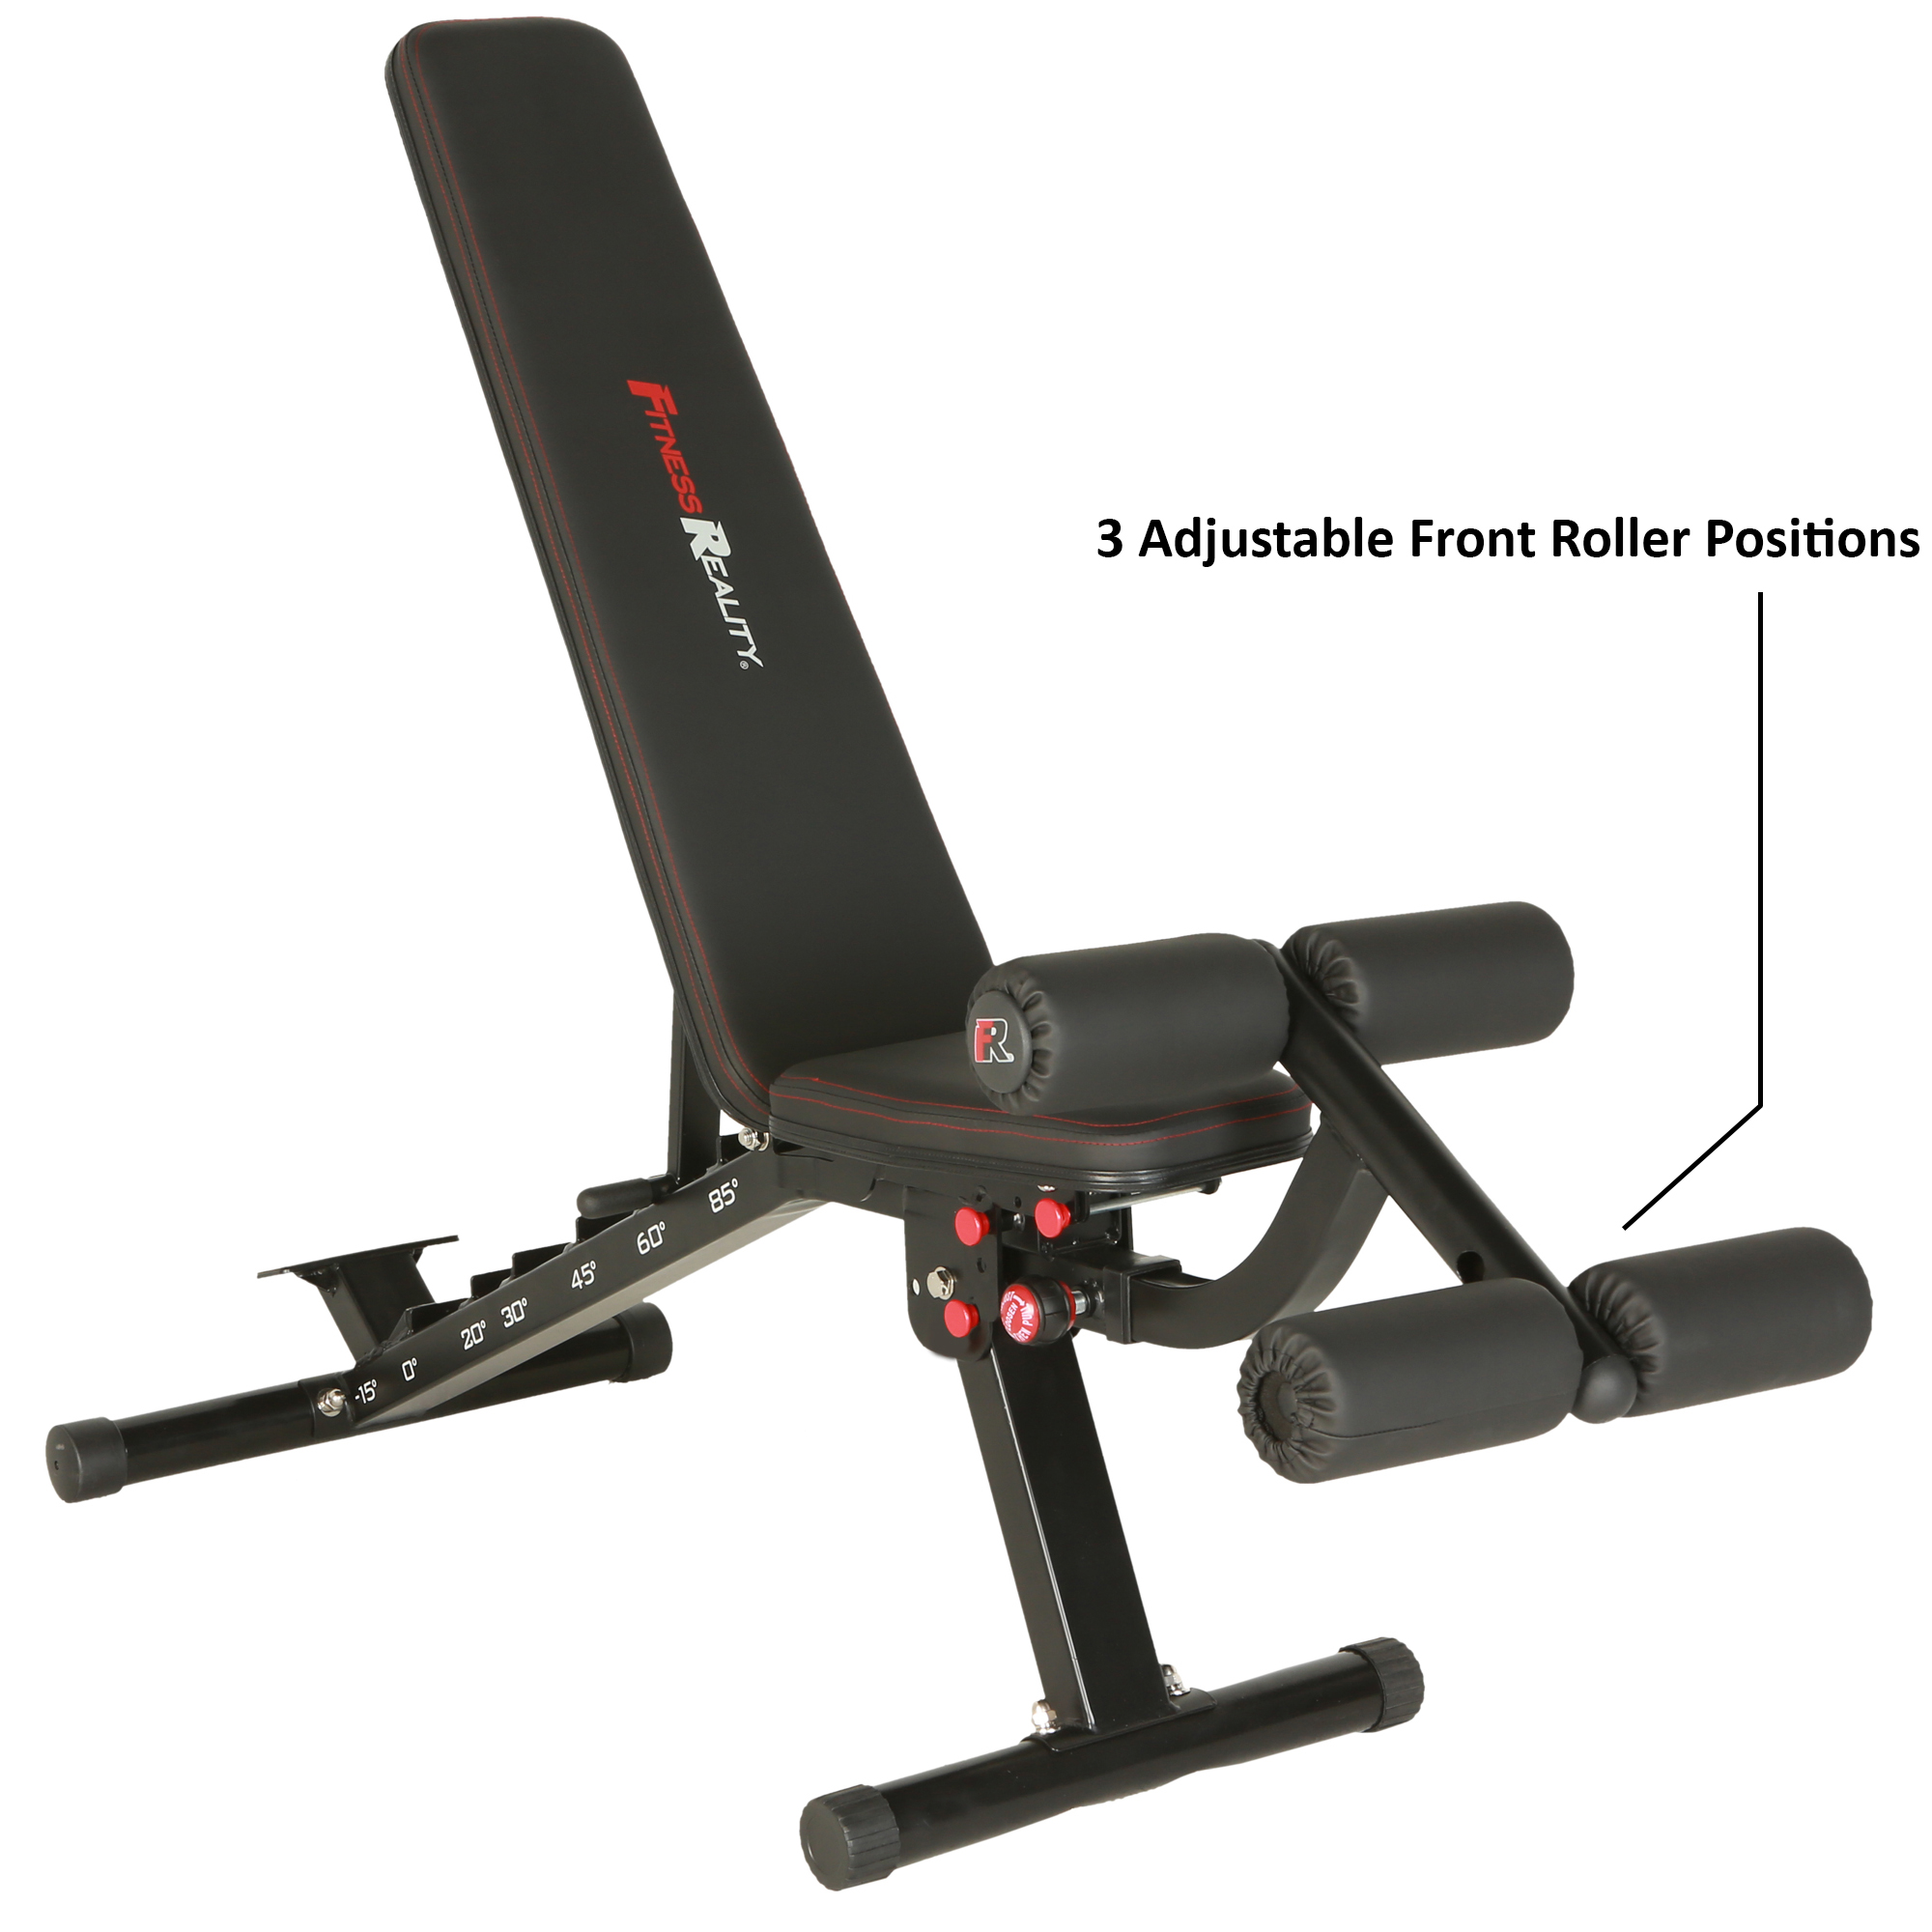 Fitness Reality 2000 Super Max Extra Large Adjustable Utility FID Weight Bench with Detachable Leg Lock-Down - image 3 of 15